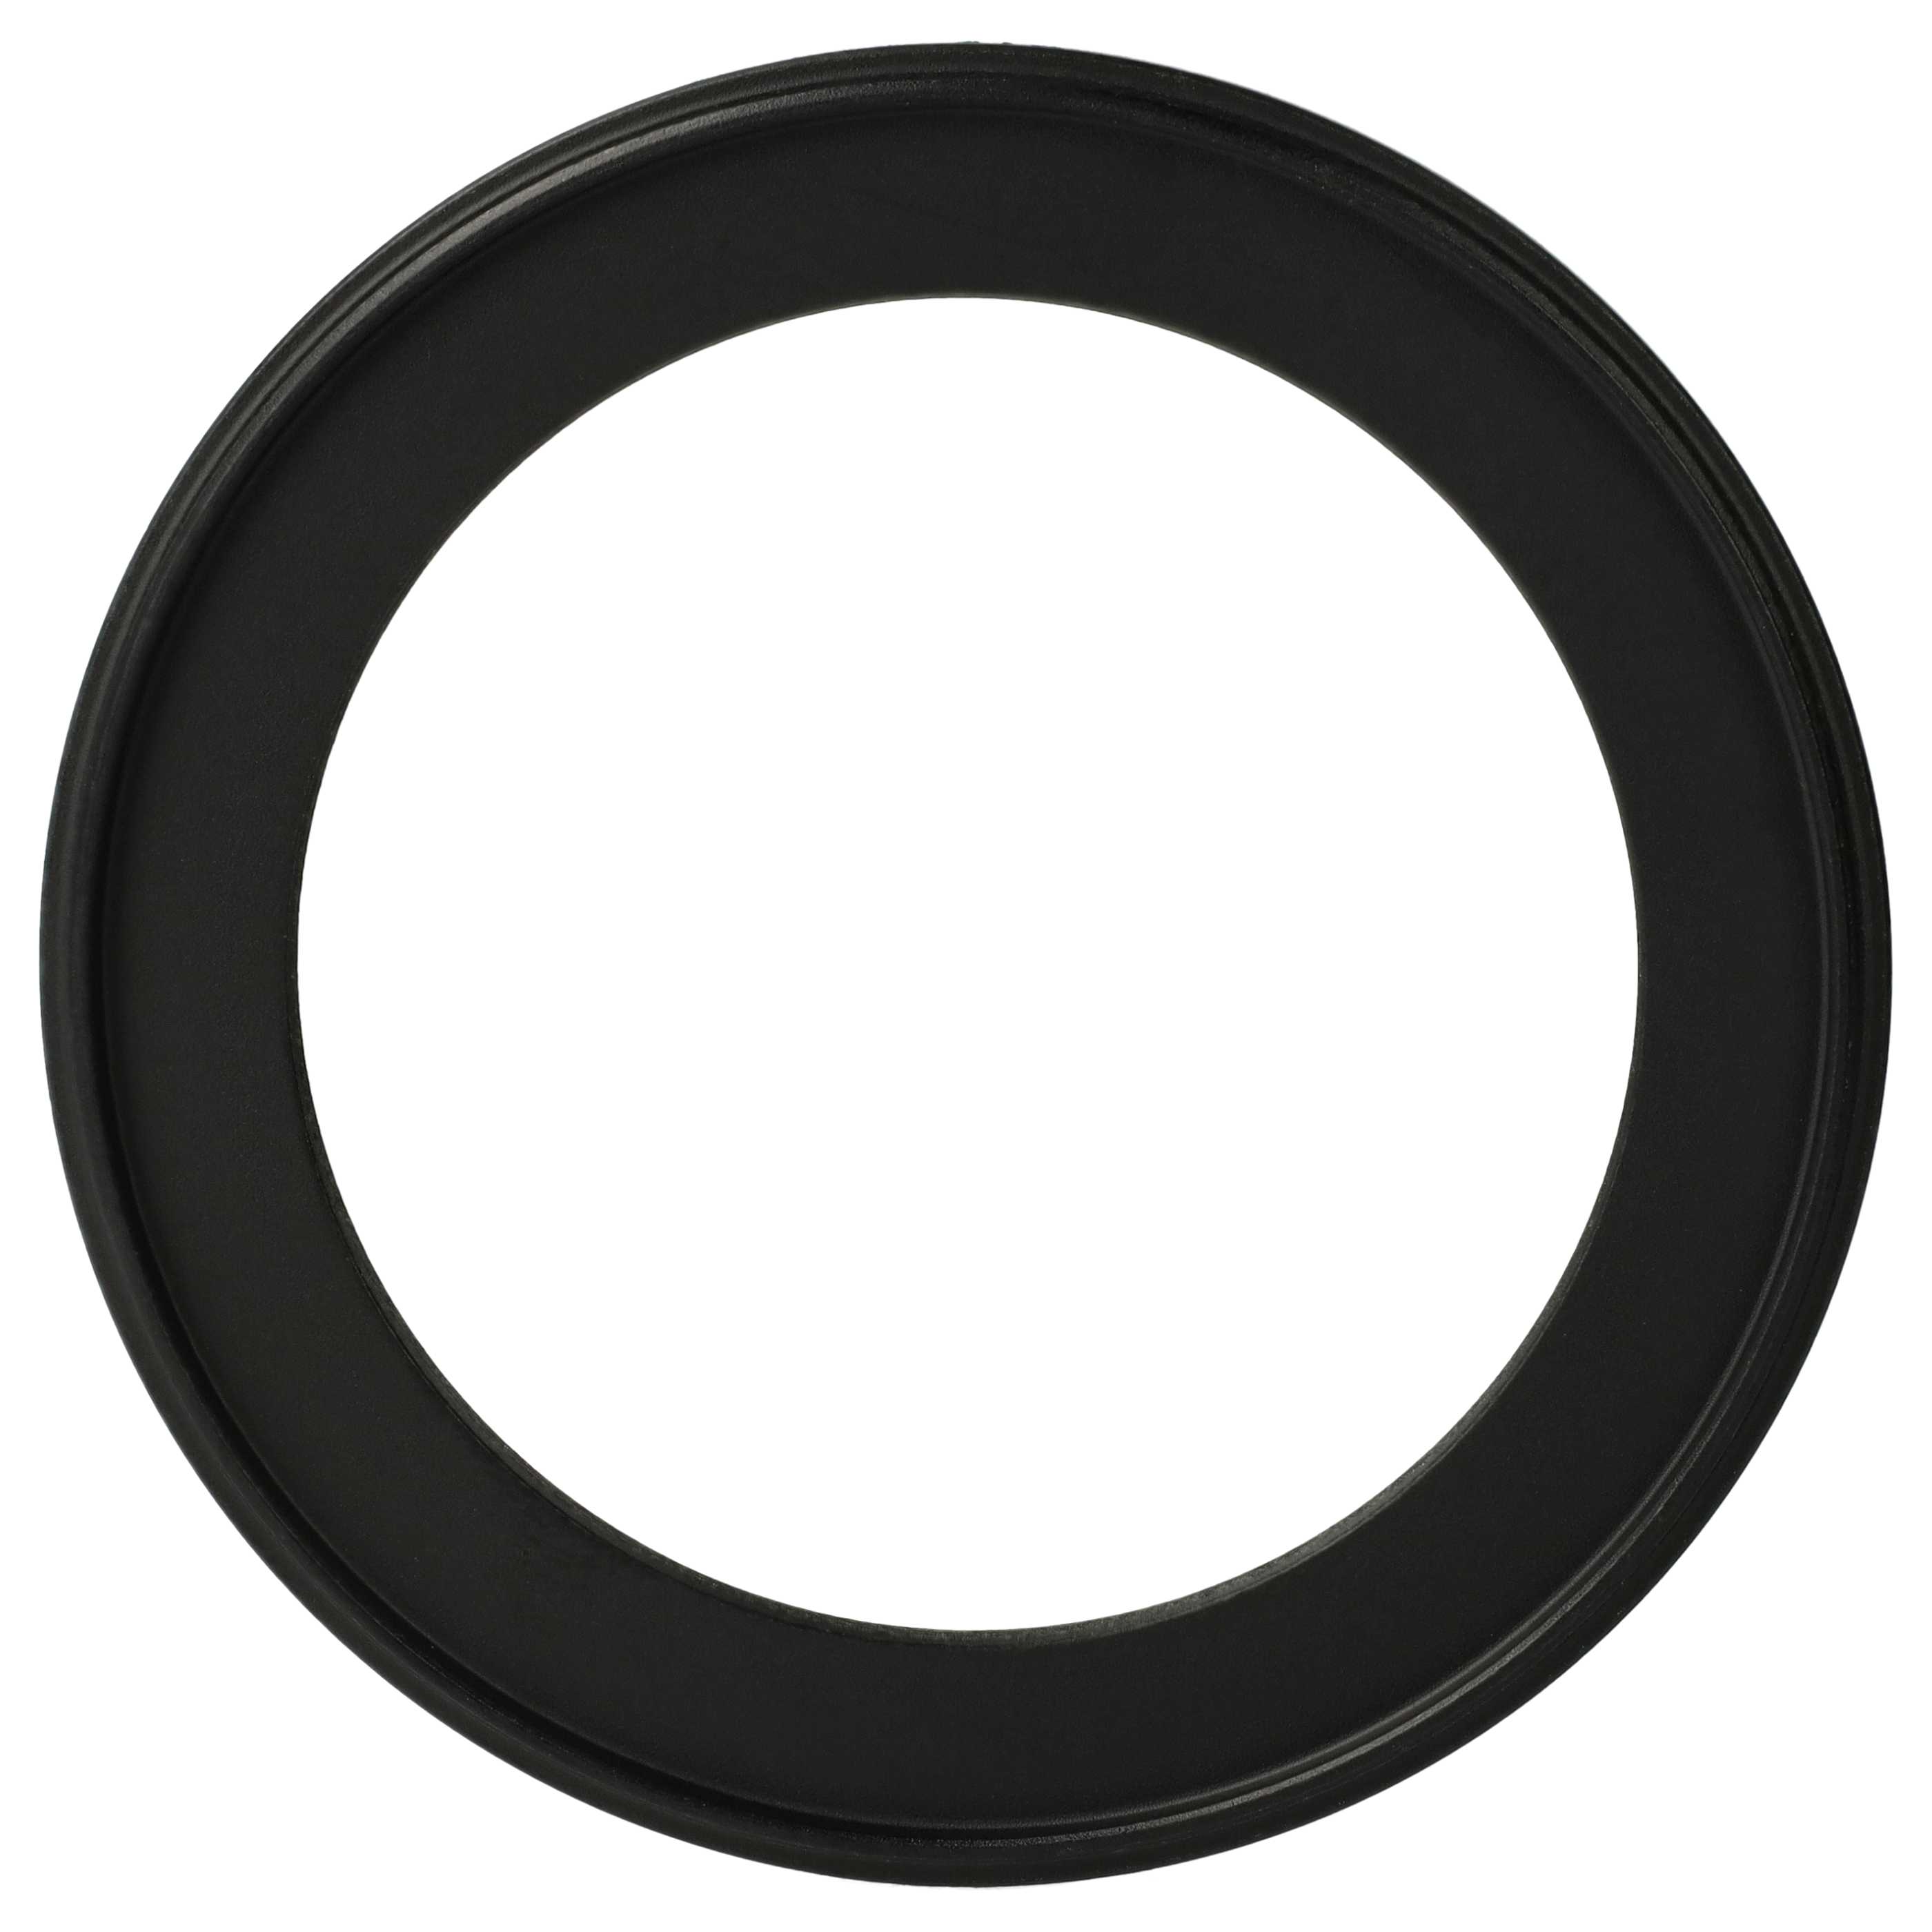 Step-Down Ring Adapter from 82 mm to 62 mm suitable for Camera Lens - Filter Adapter, metal